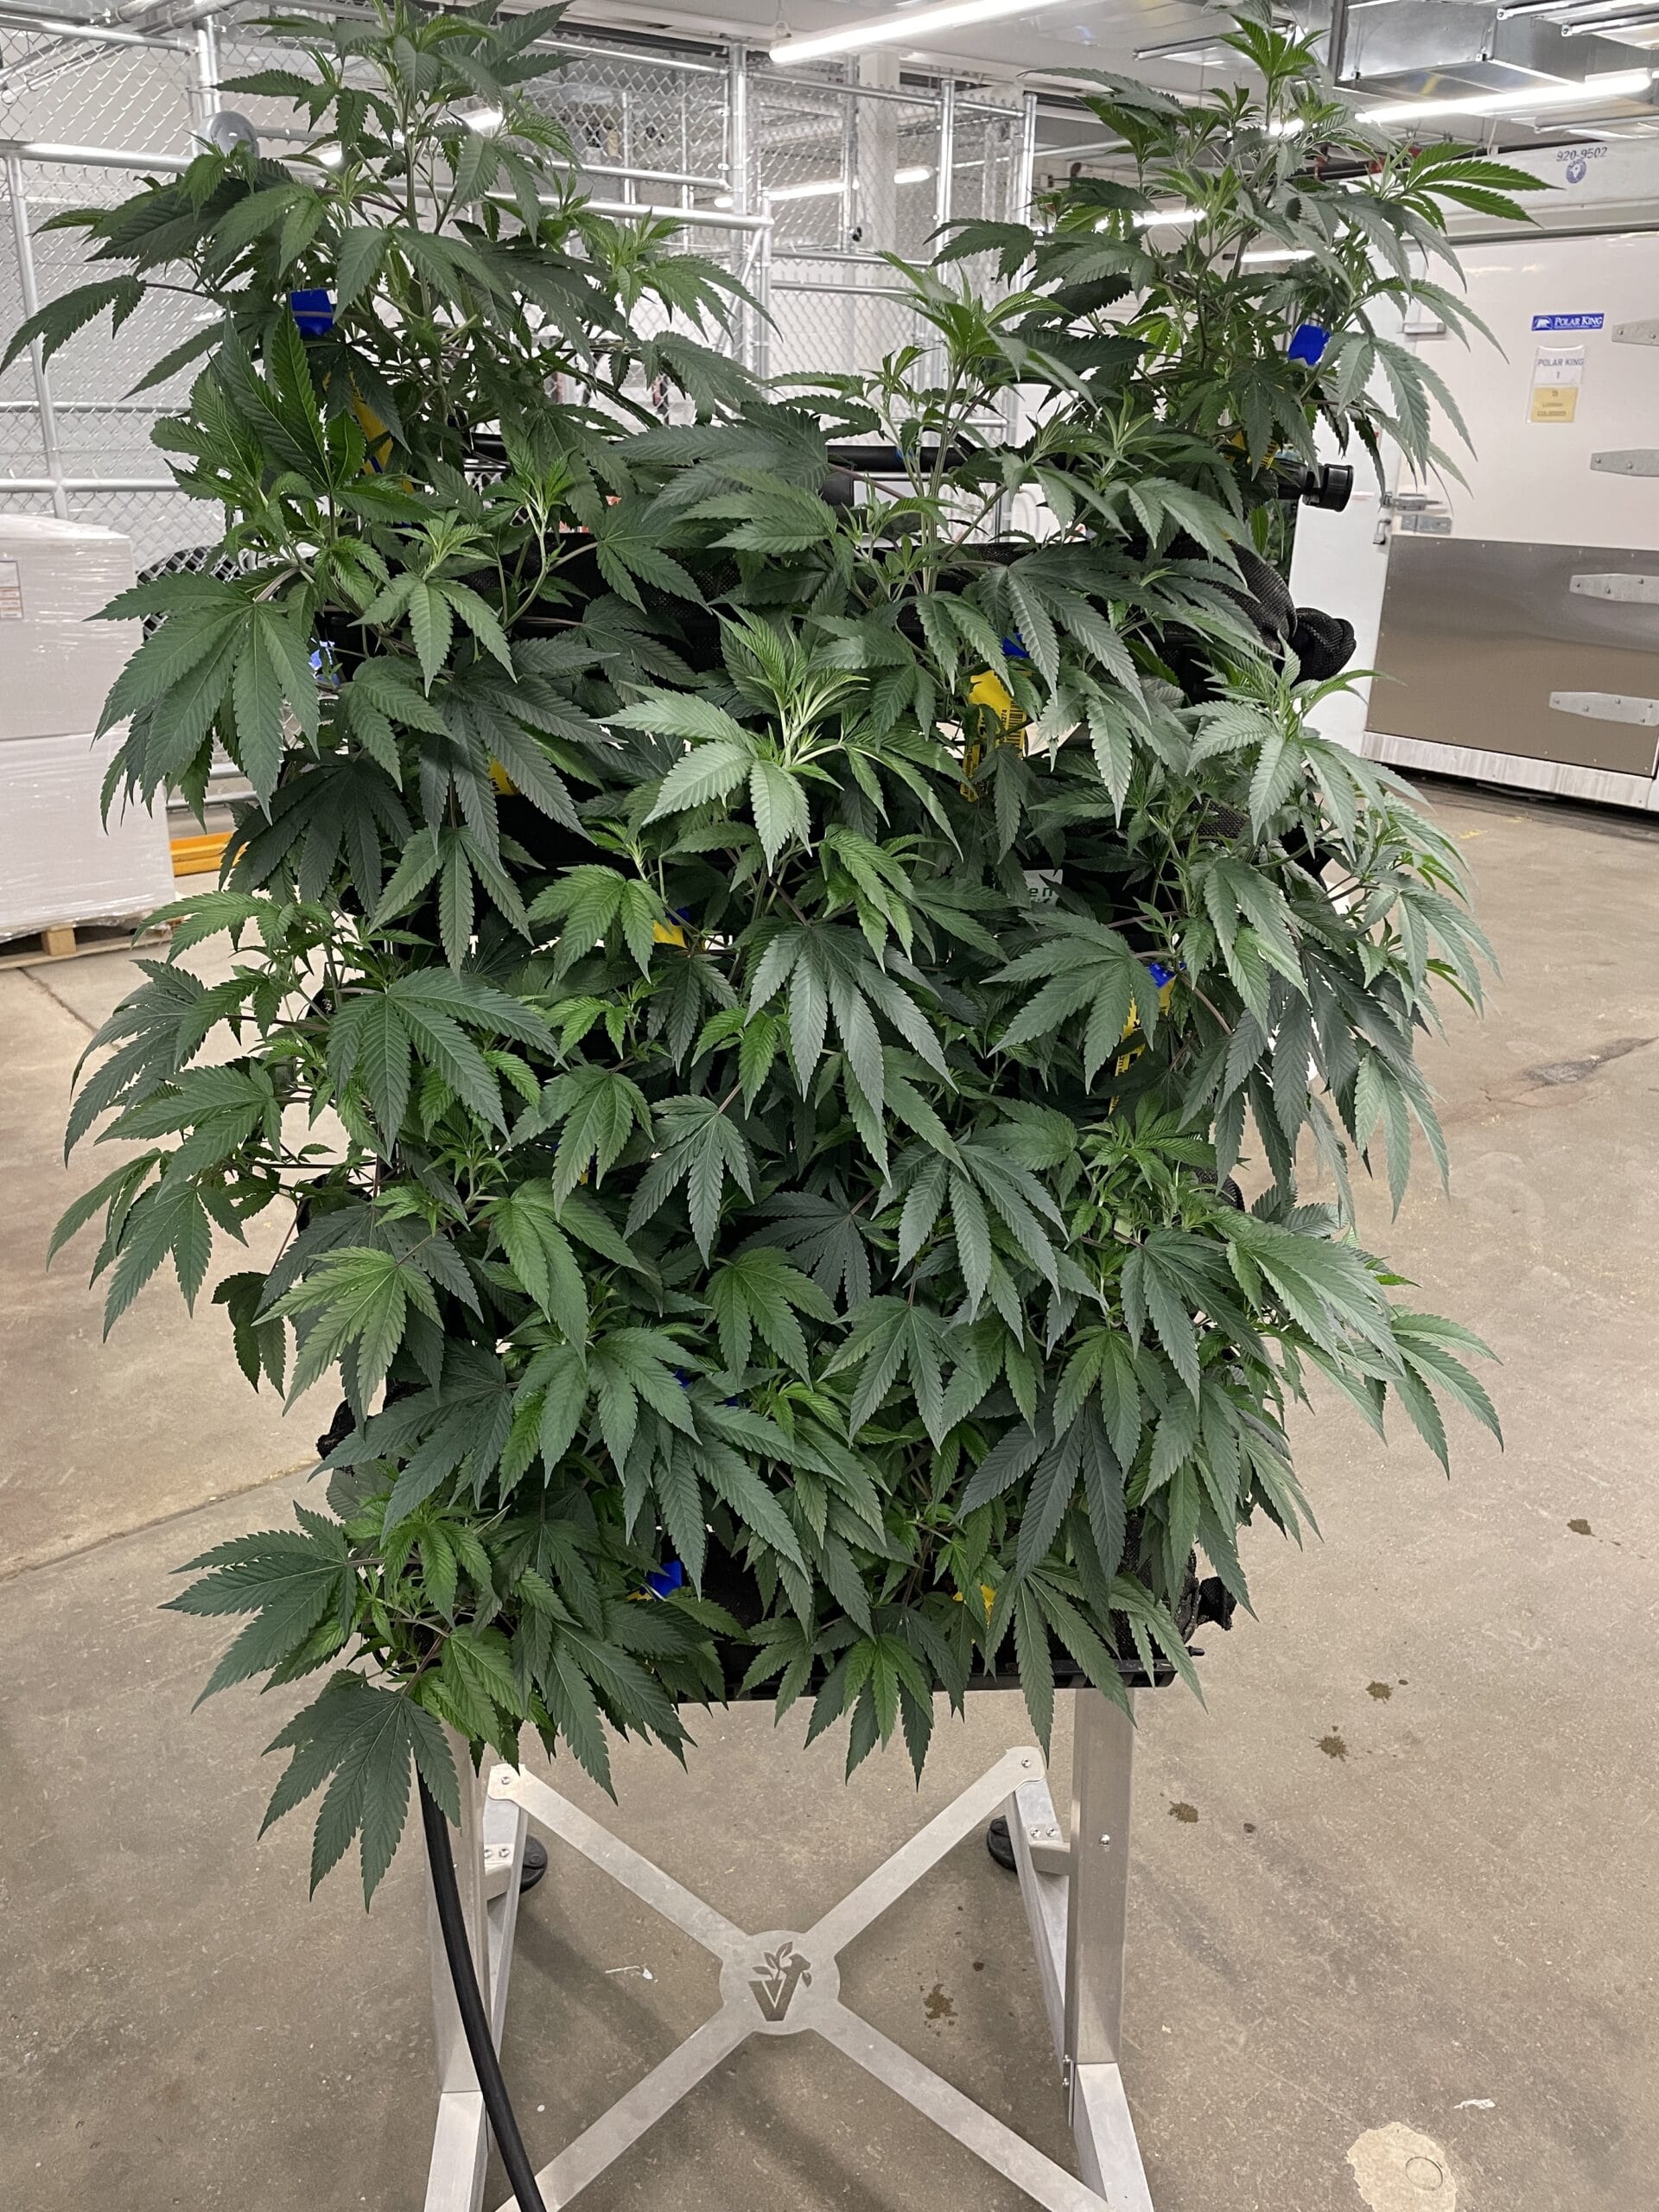 Cannabis growing vertically on a rack